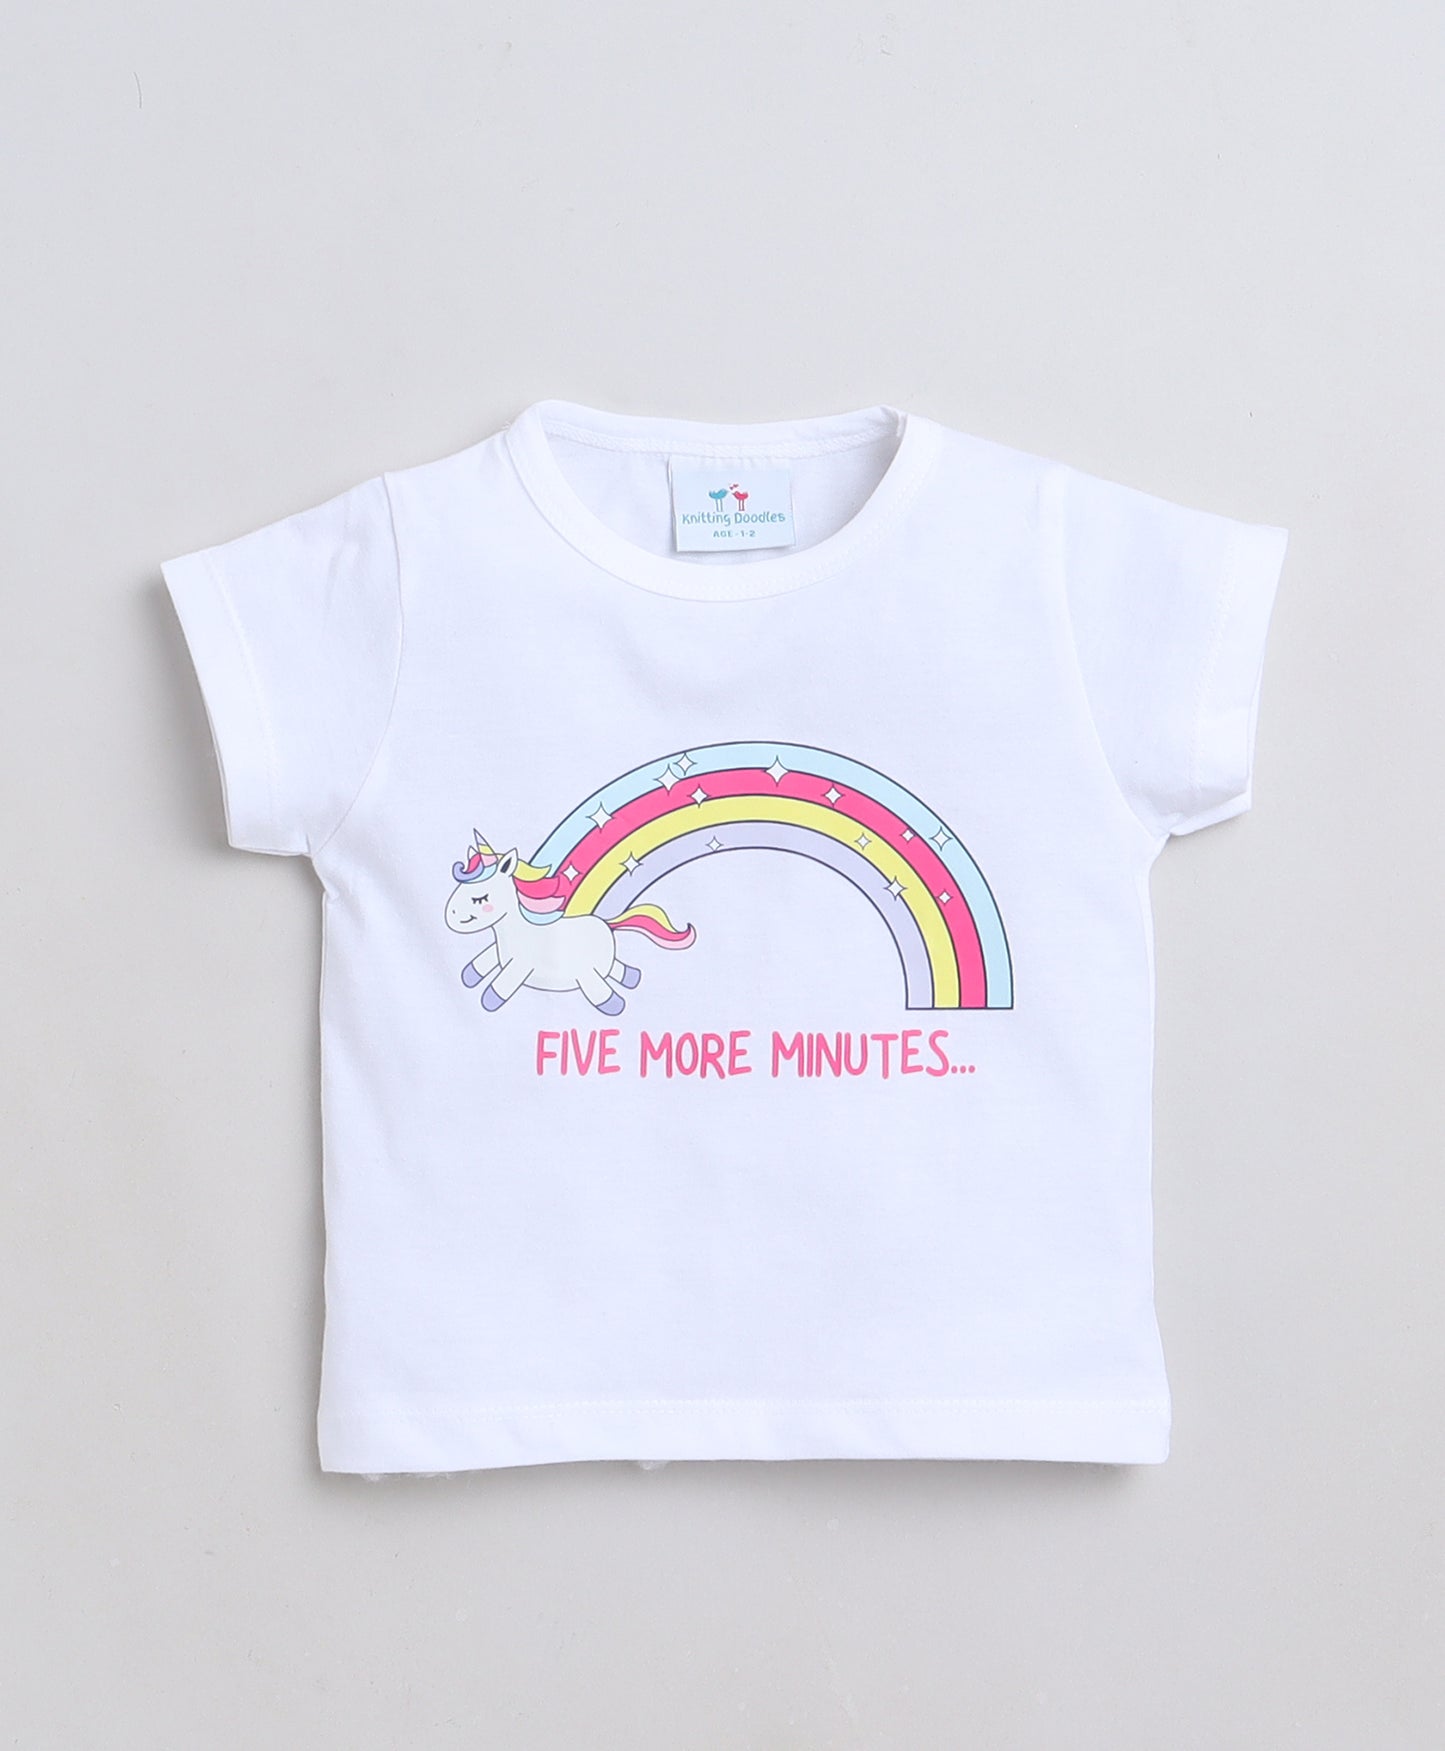 Knitting Doodles Premium Cotton Kids' Night suit with Unicorn print t-shirt and Pyjama- Pink and White